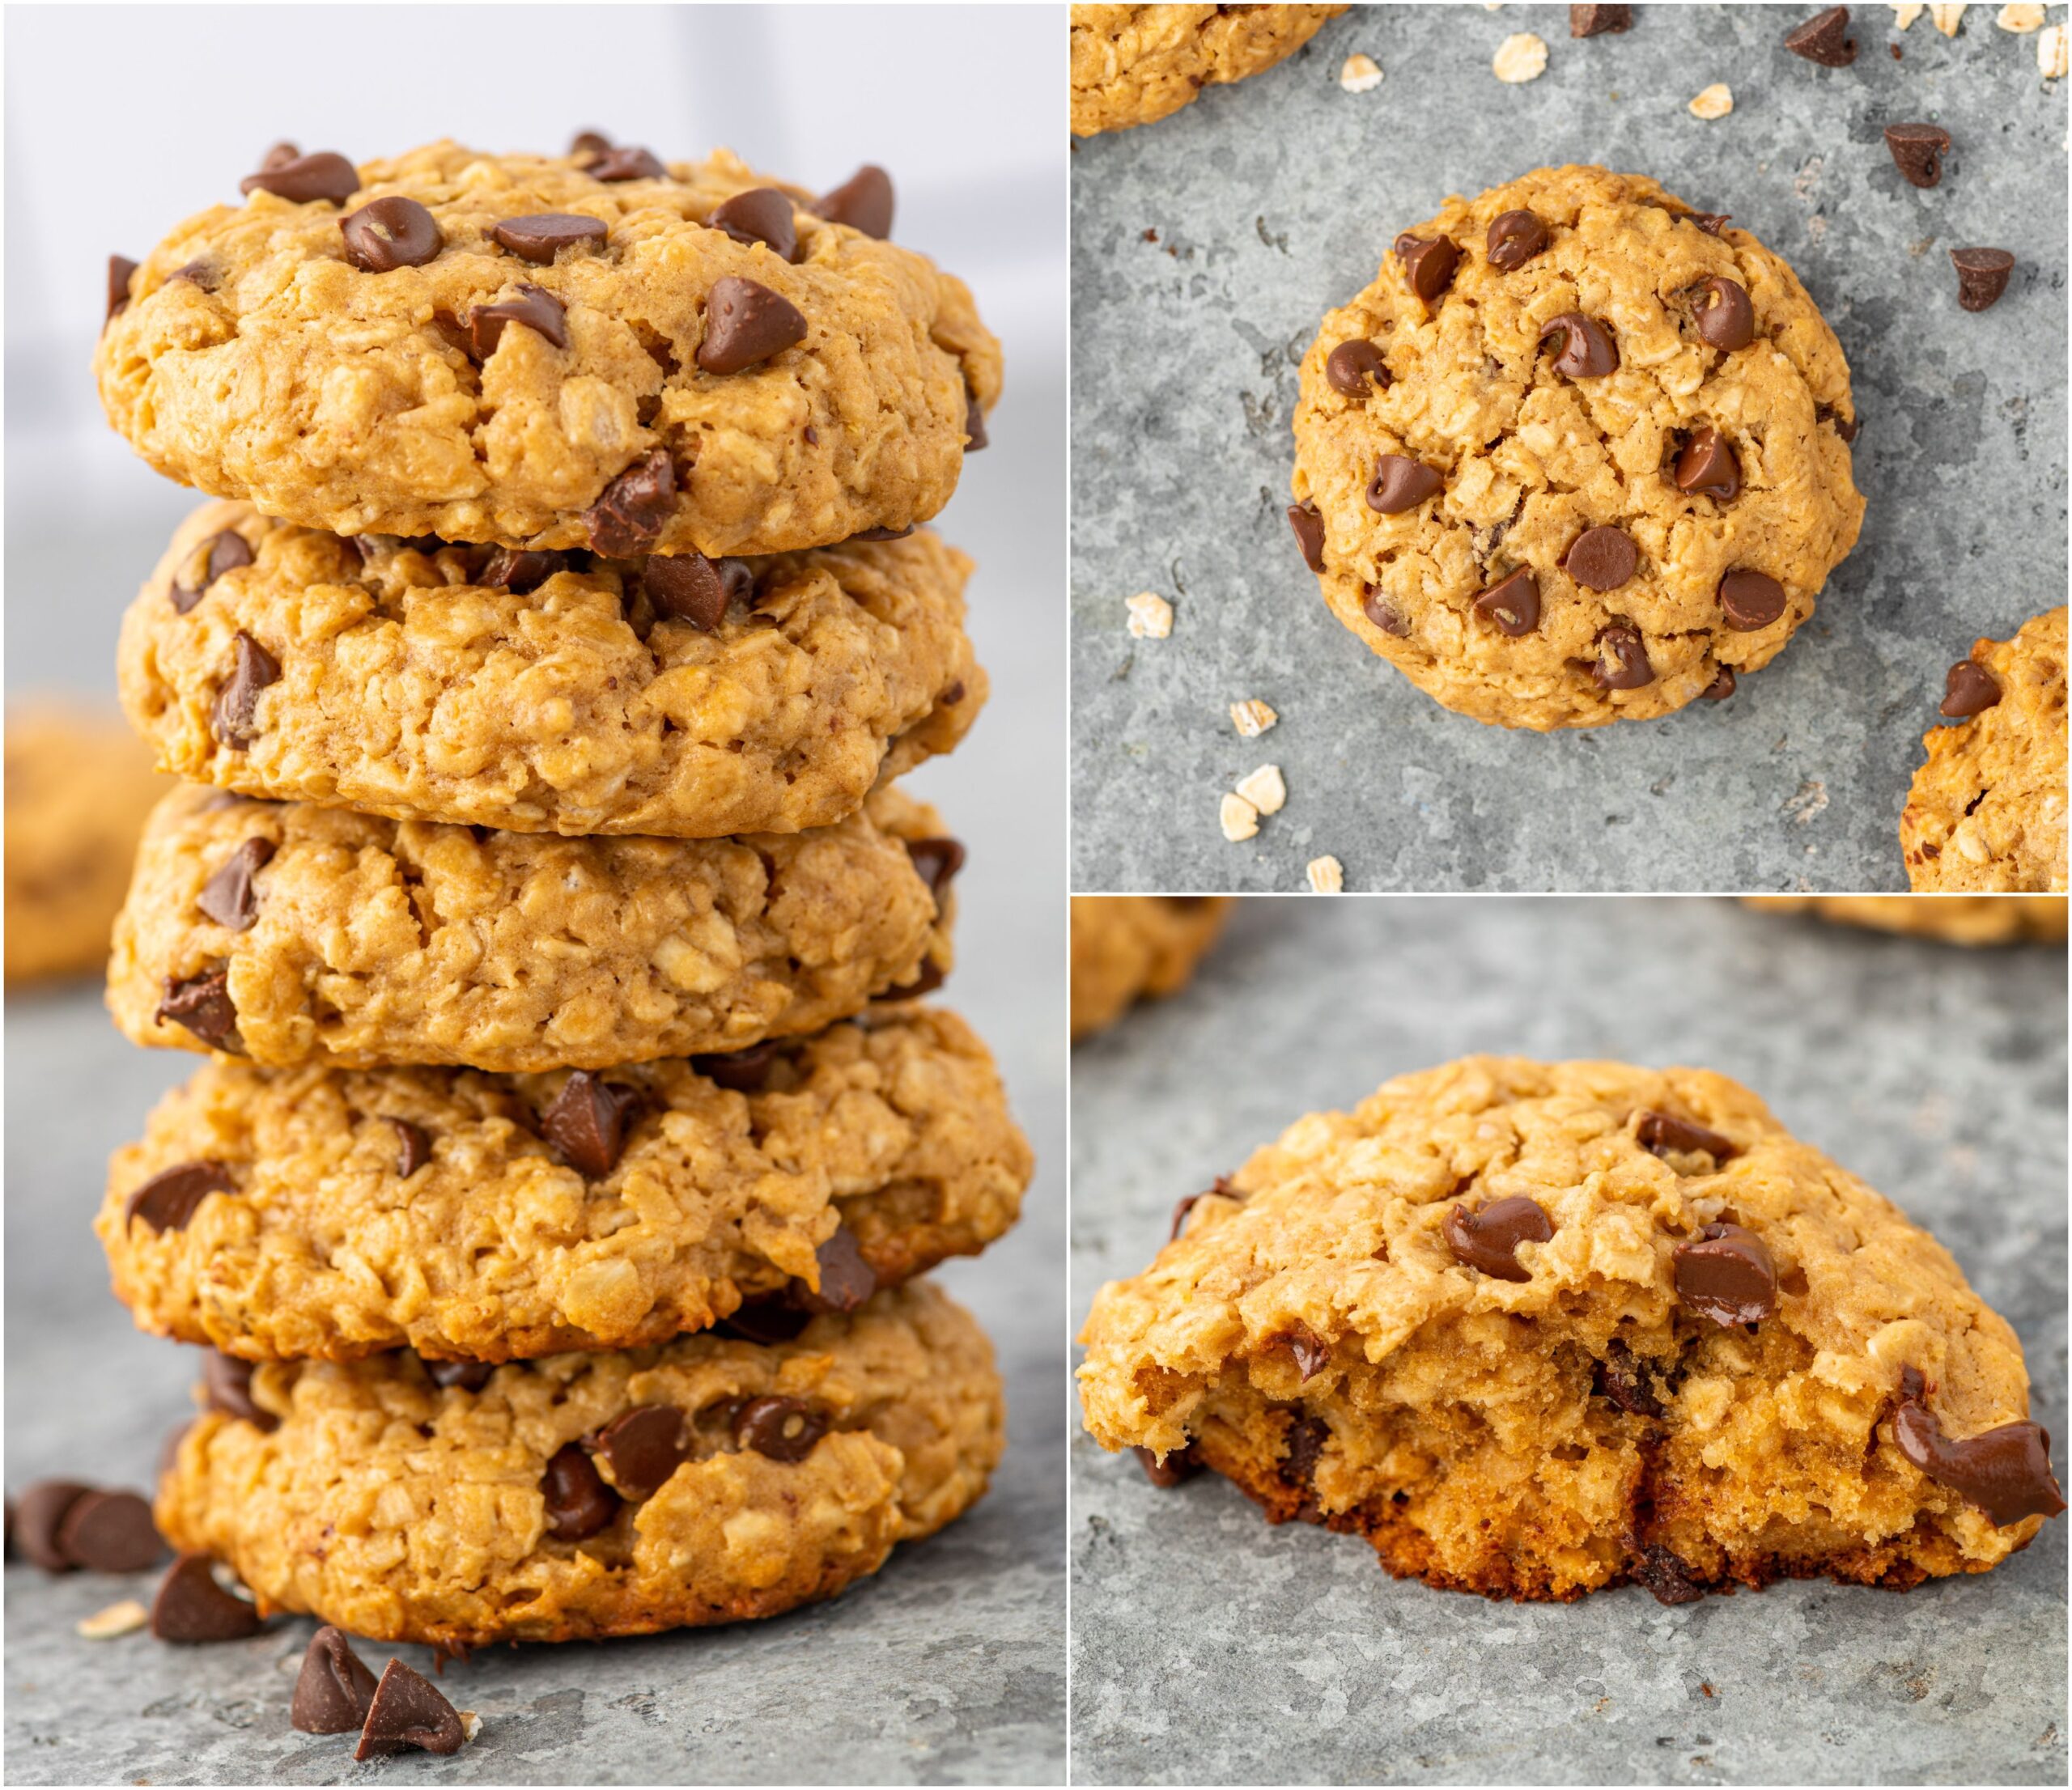 Baked oatmeal cookies with chocolate chips.